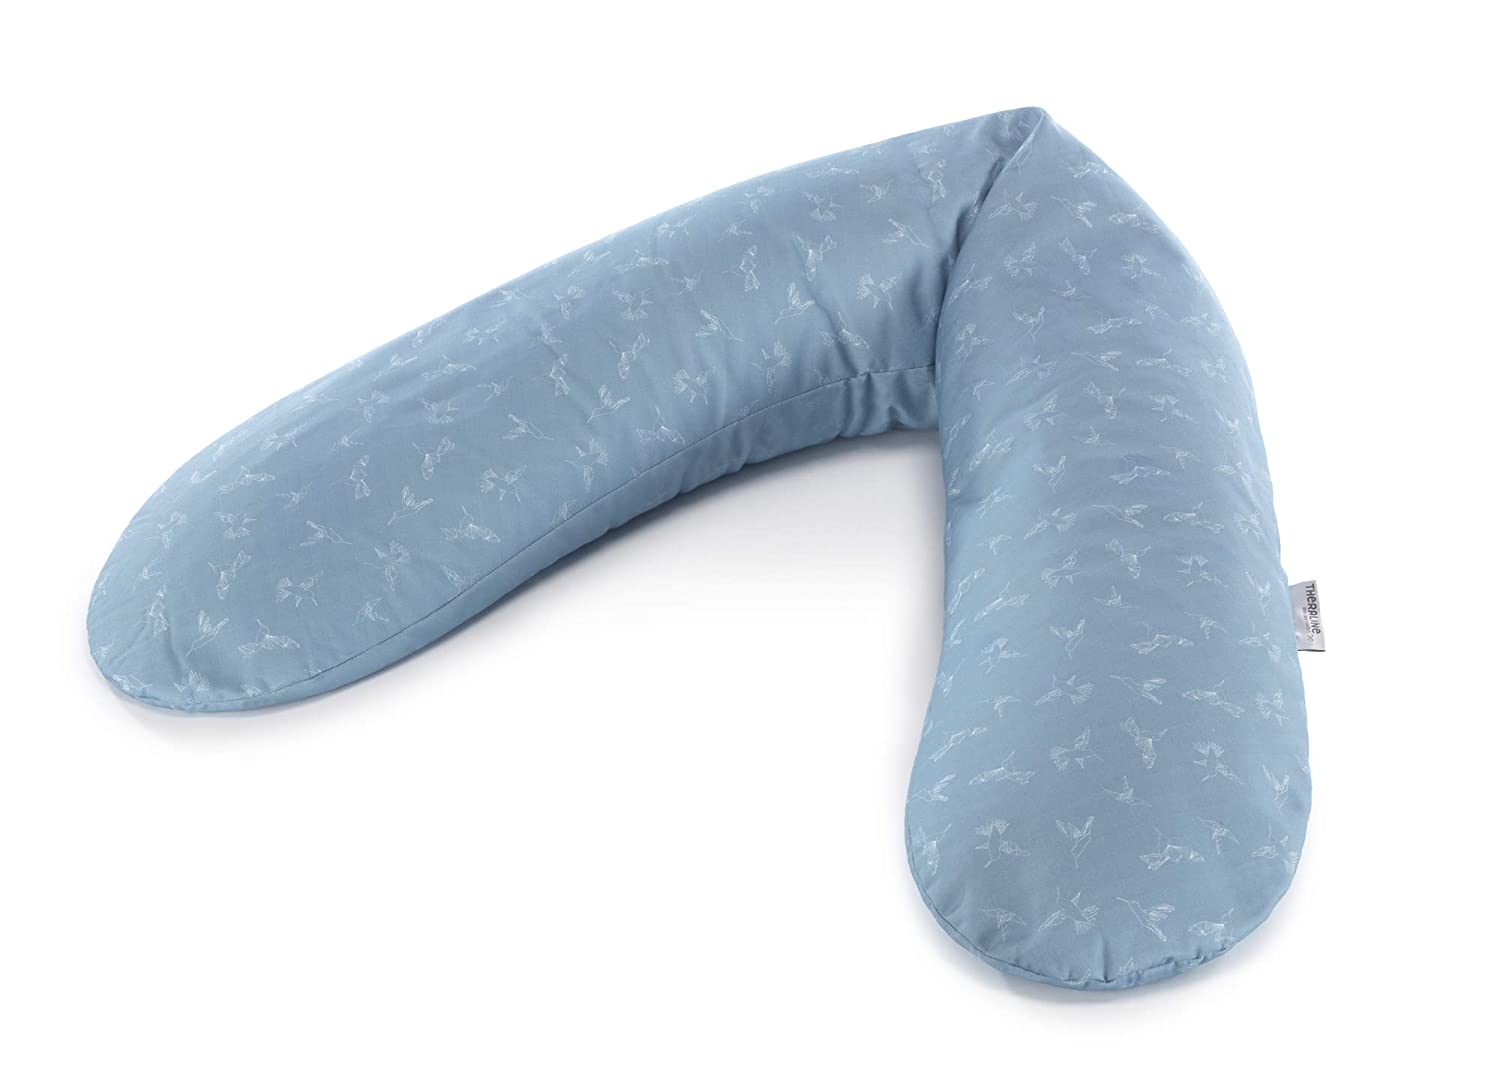 Replacement Cover For The Original Theraline Pregnancy And Nursing Pillow, 100% Cotton. Pattern Hummingbird